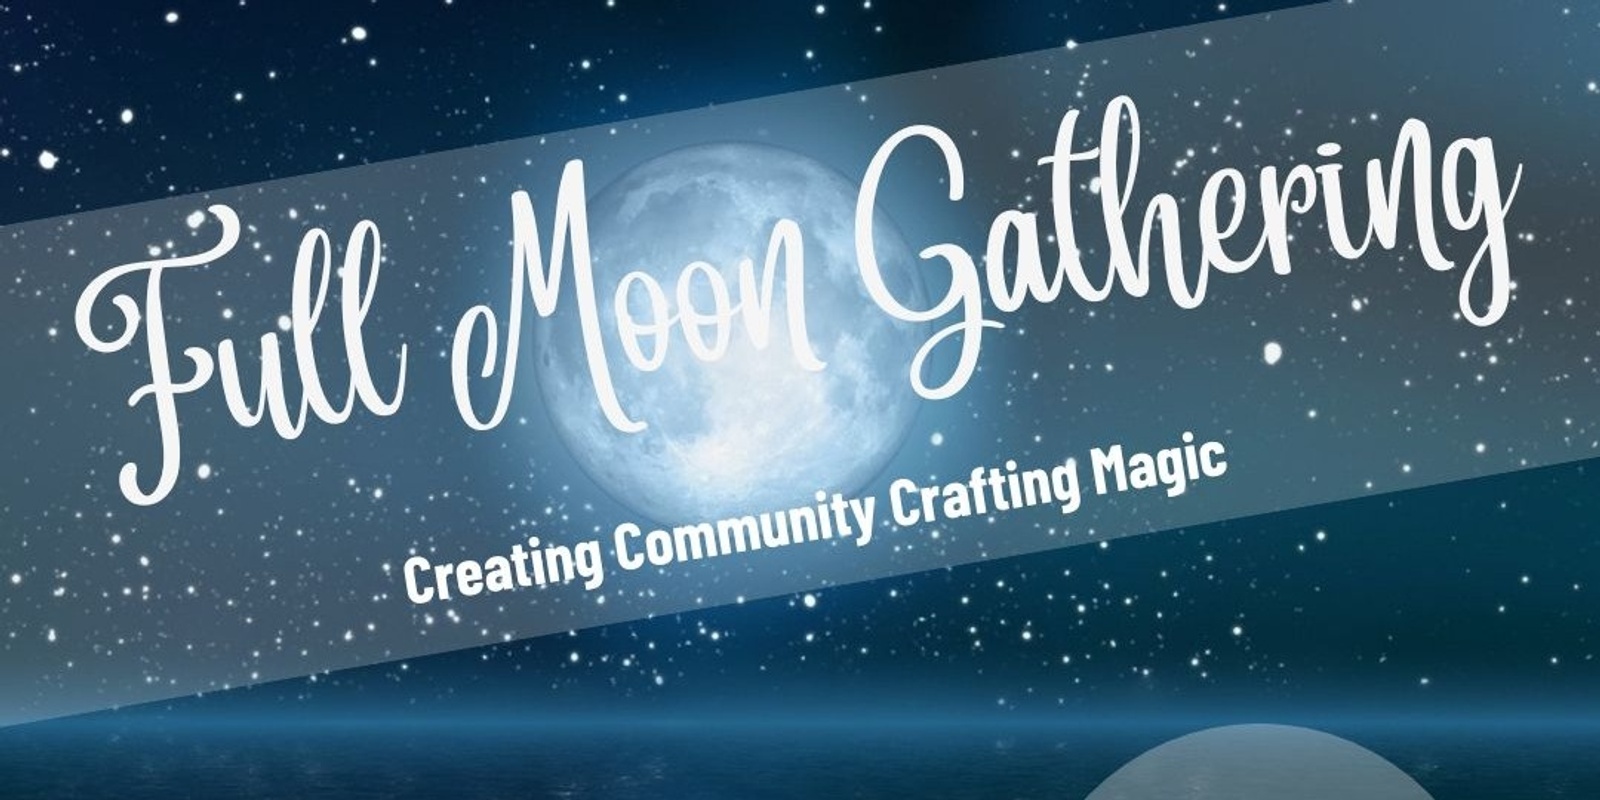 Banner image for October Full Moon Gathering at Largs Bay